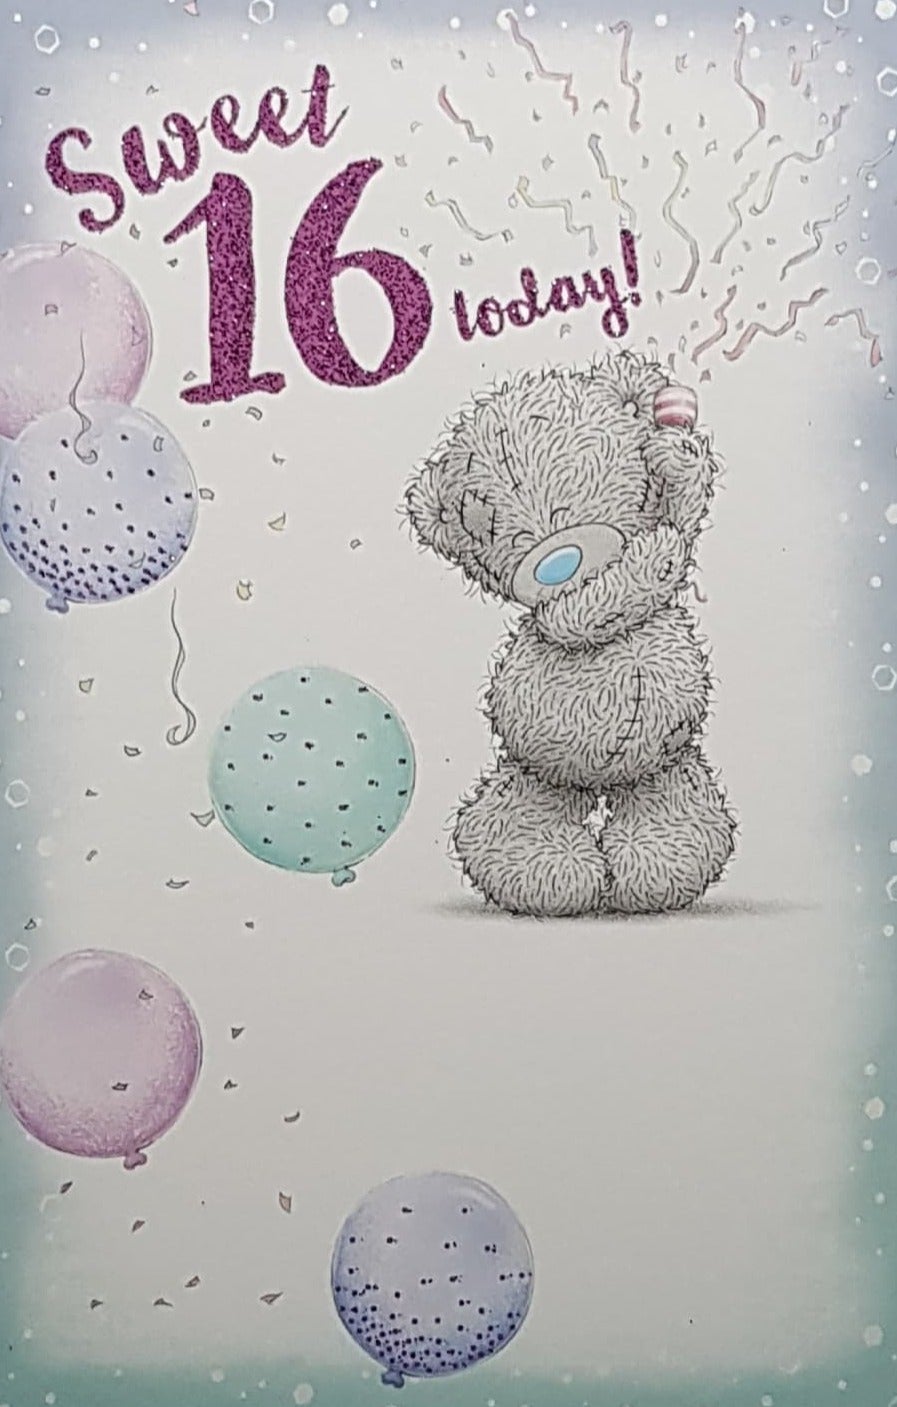 Age 16 Birthday Card - 'Sweet 16 Today' & Teddy With Party Popper, Purple & Pink Balloons